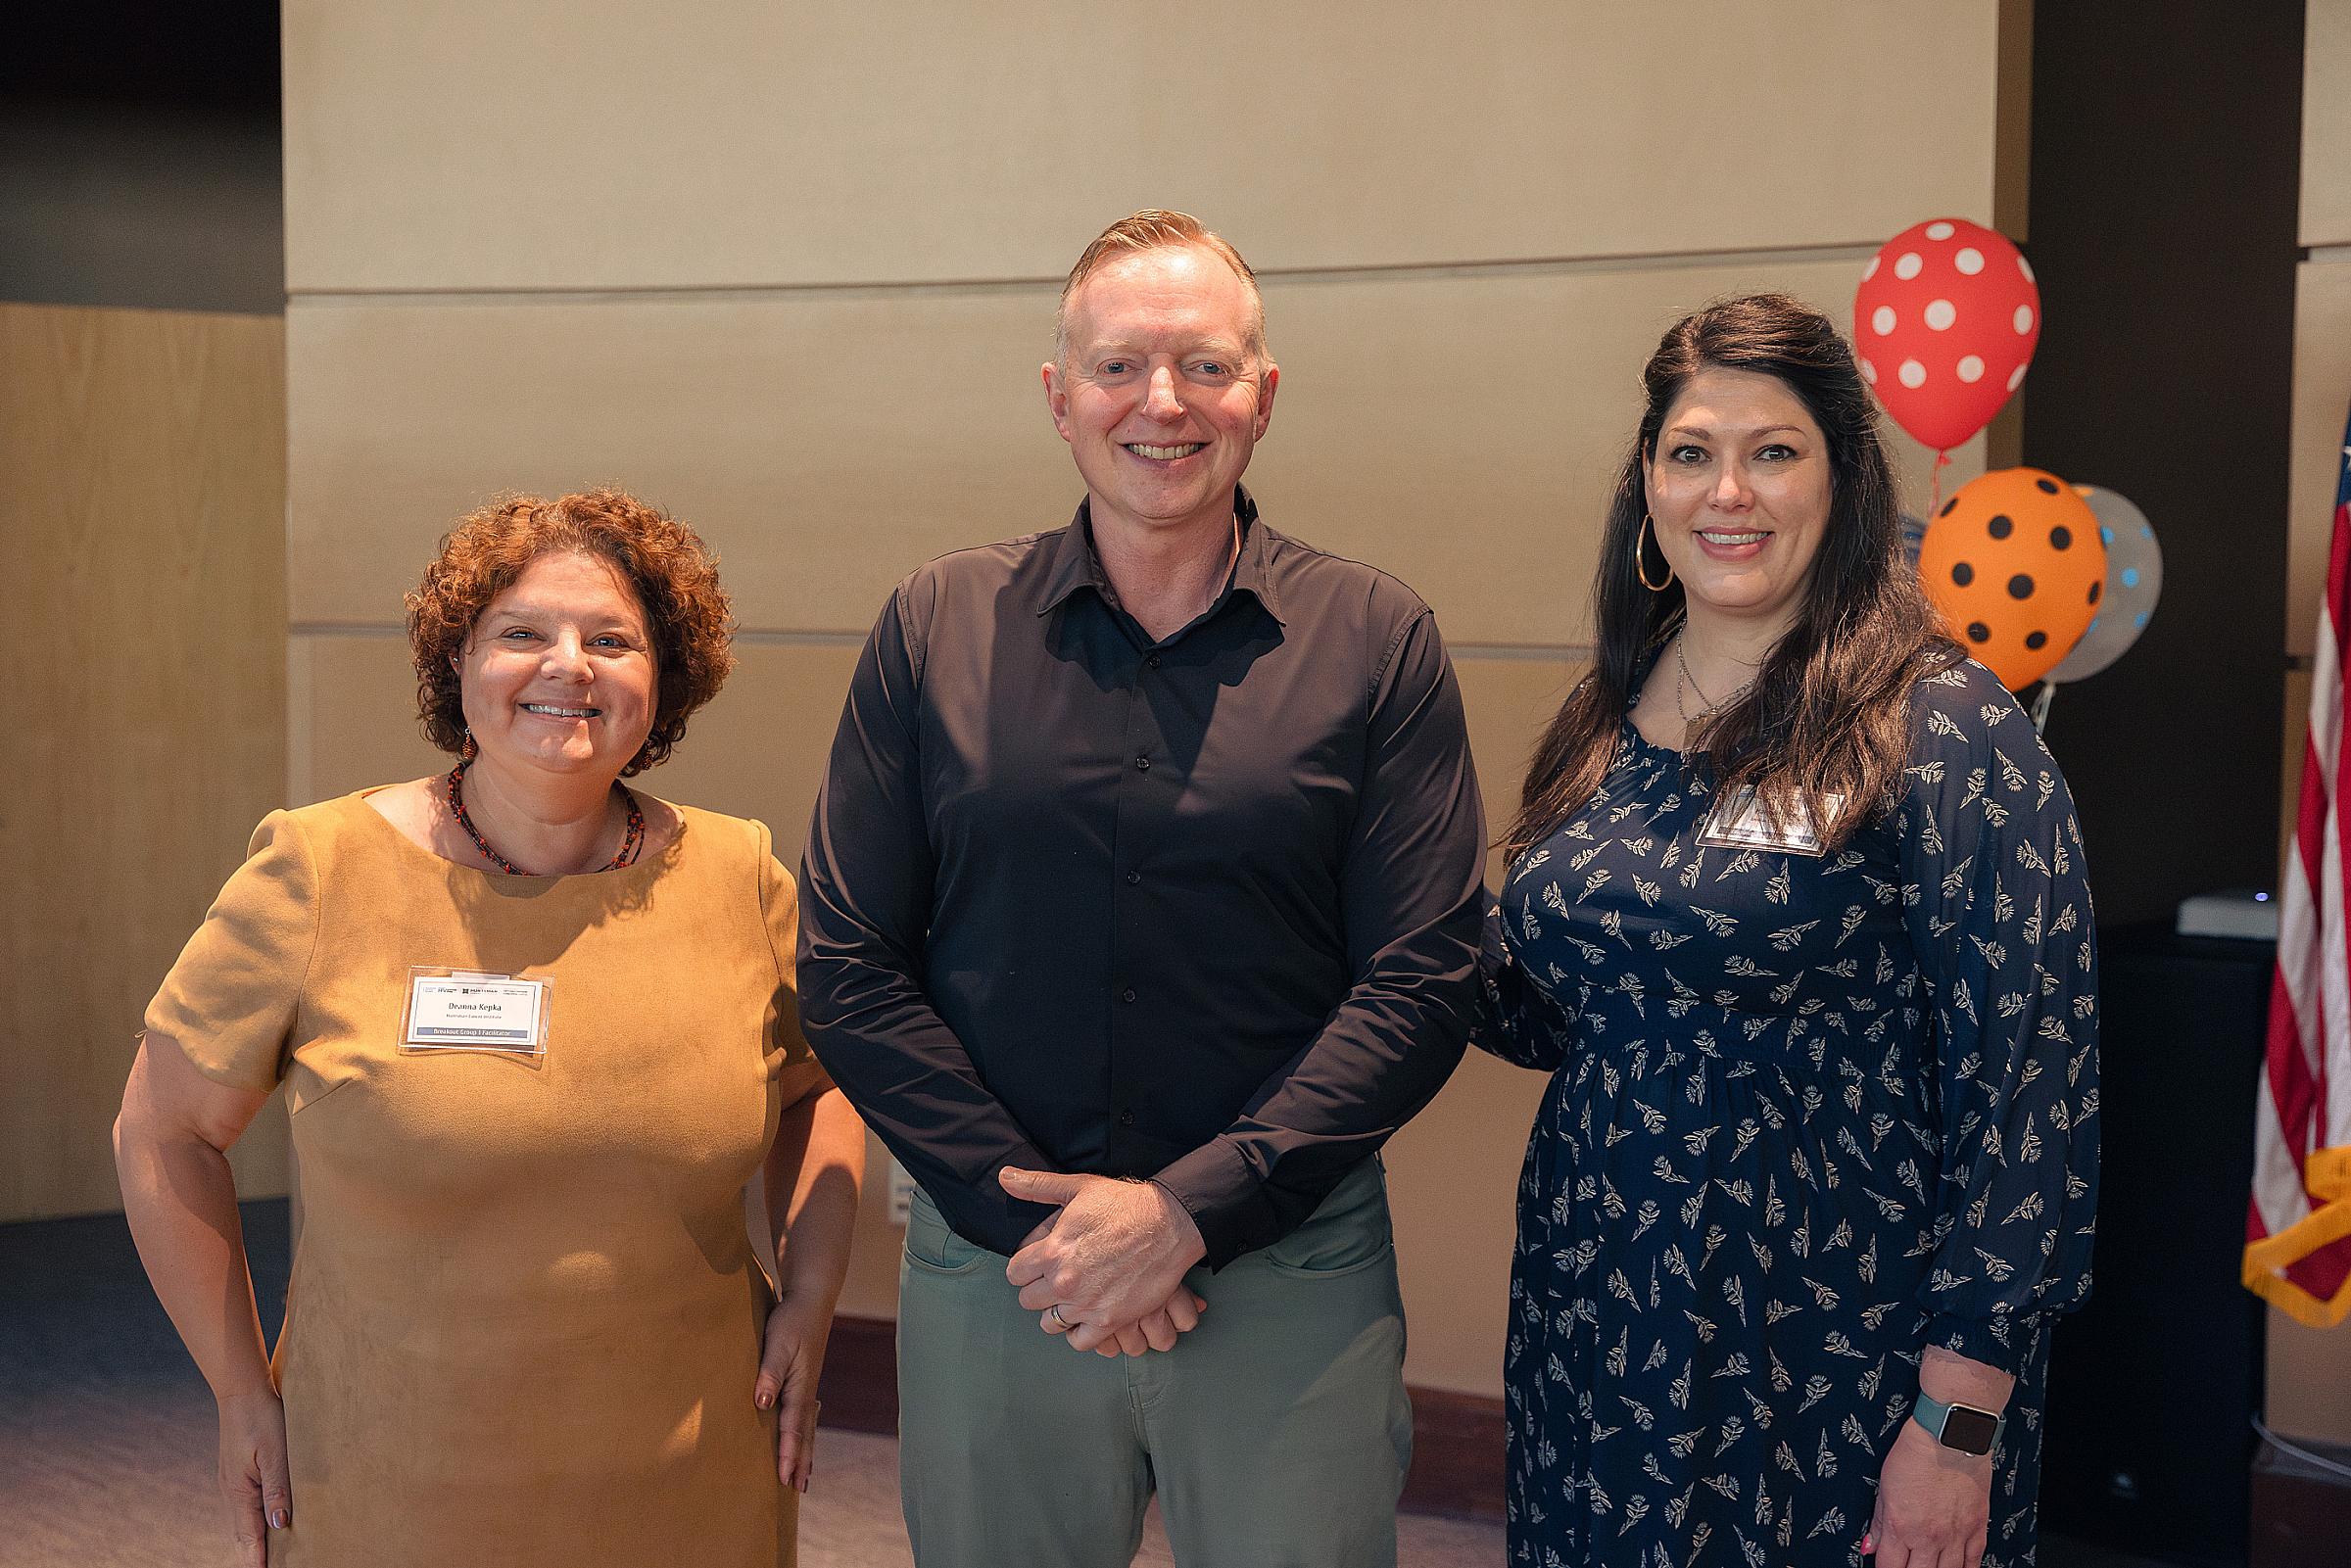 Oropharyngeal cancer survivor, Mike West (center), poses with Coalition director Deanna Kepka, PhD, MPH (left) and ACS Senior Program Manager for HPV in the Rocky Mountain Area, Hannah Nein (right).